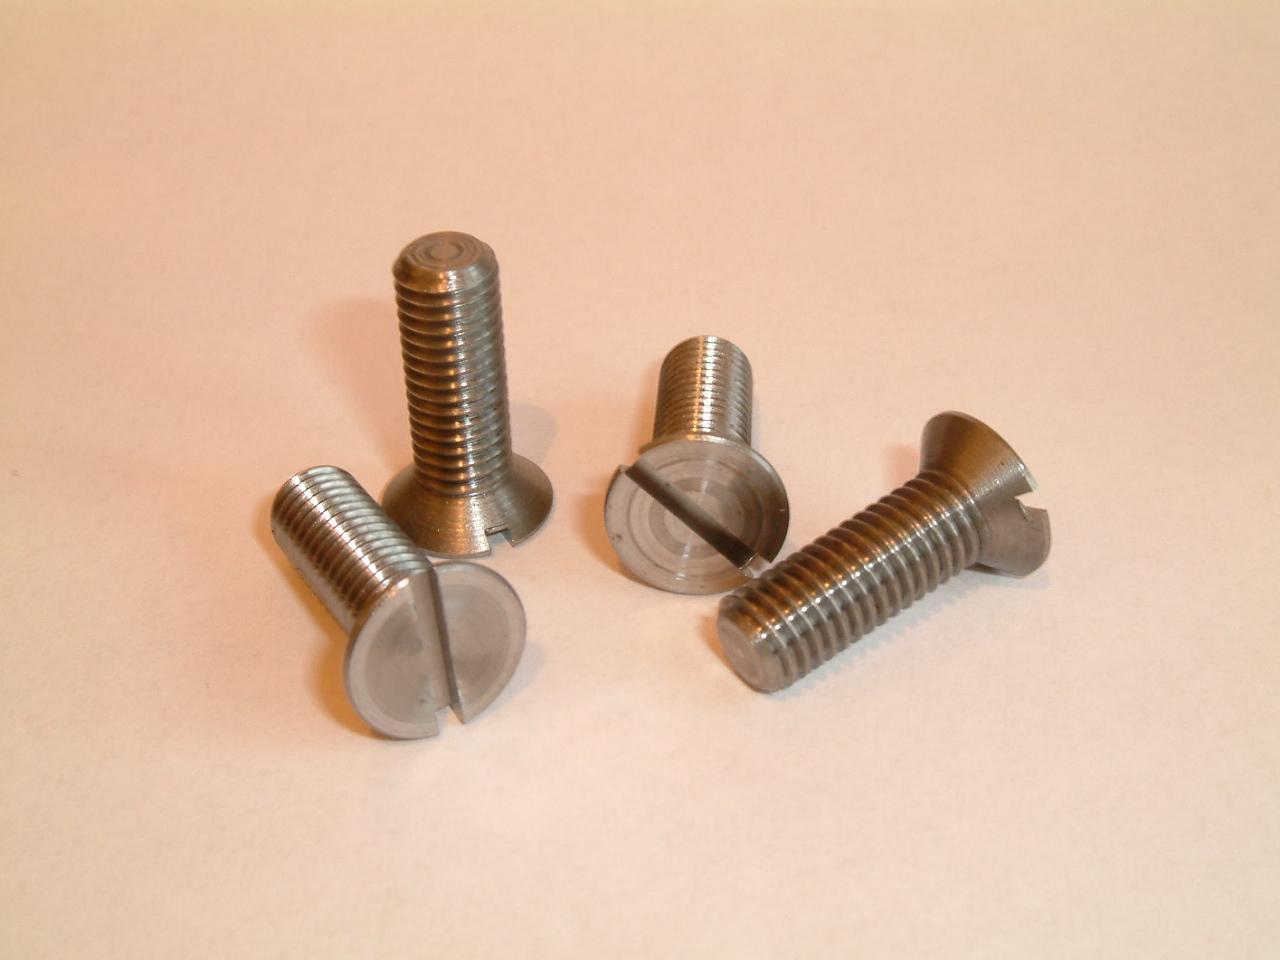 Details about   3/16 BSW Whitworth slotted cheese head screws BZP sets of 10-100 1/2in & 3/4in 